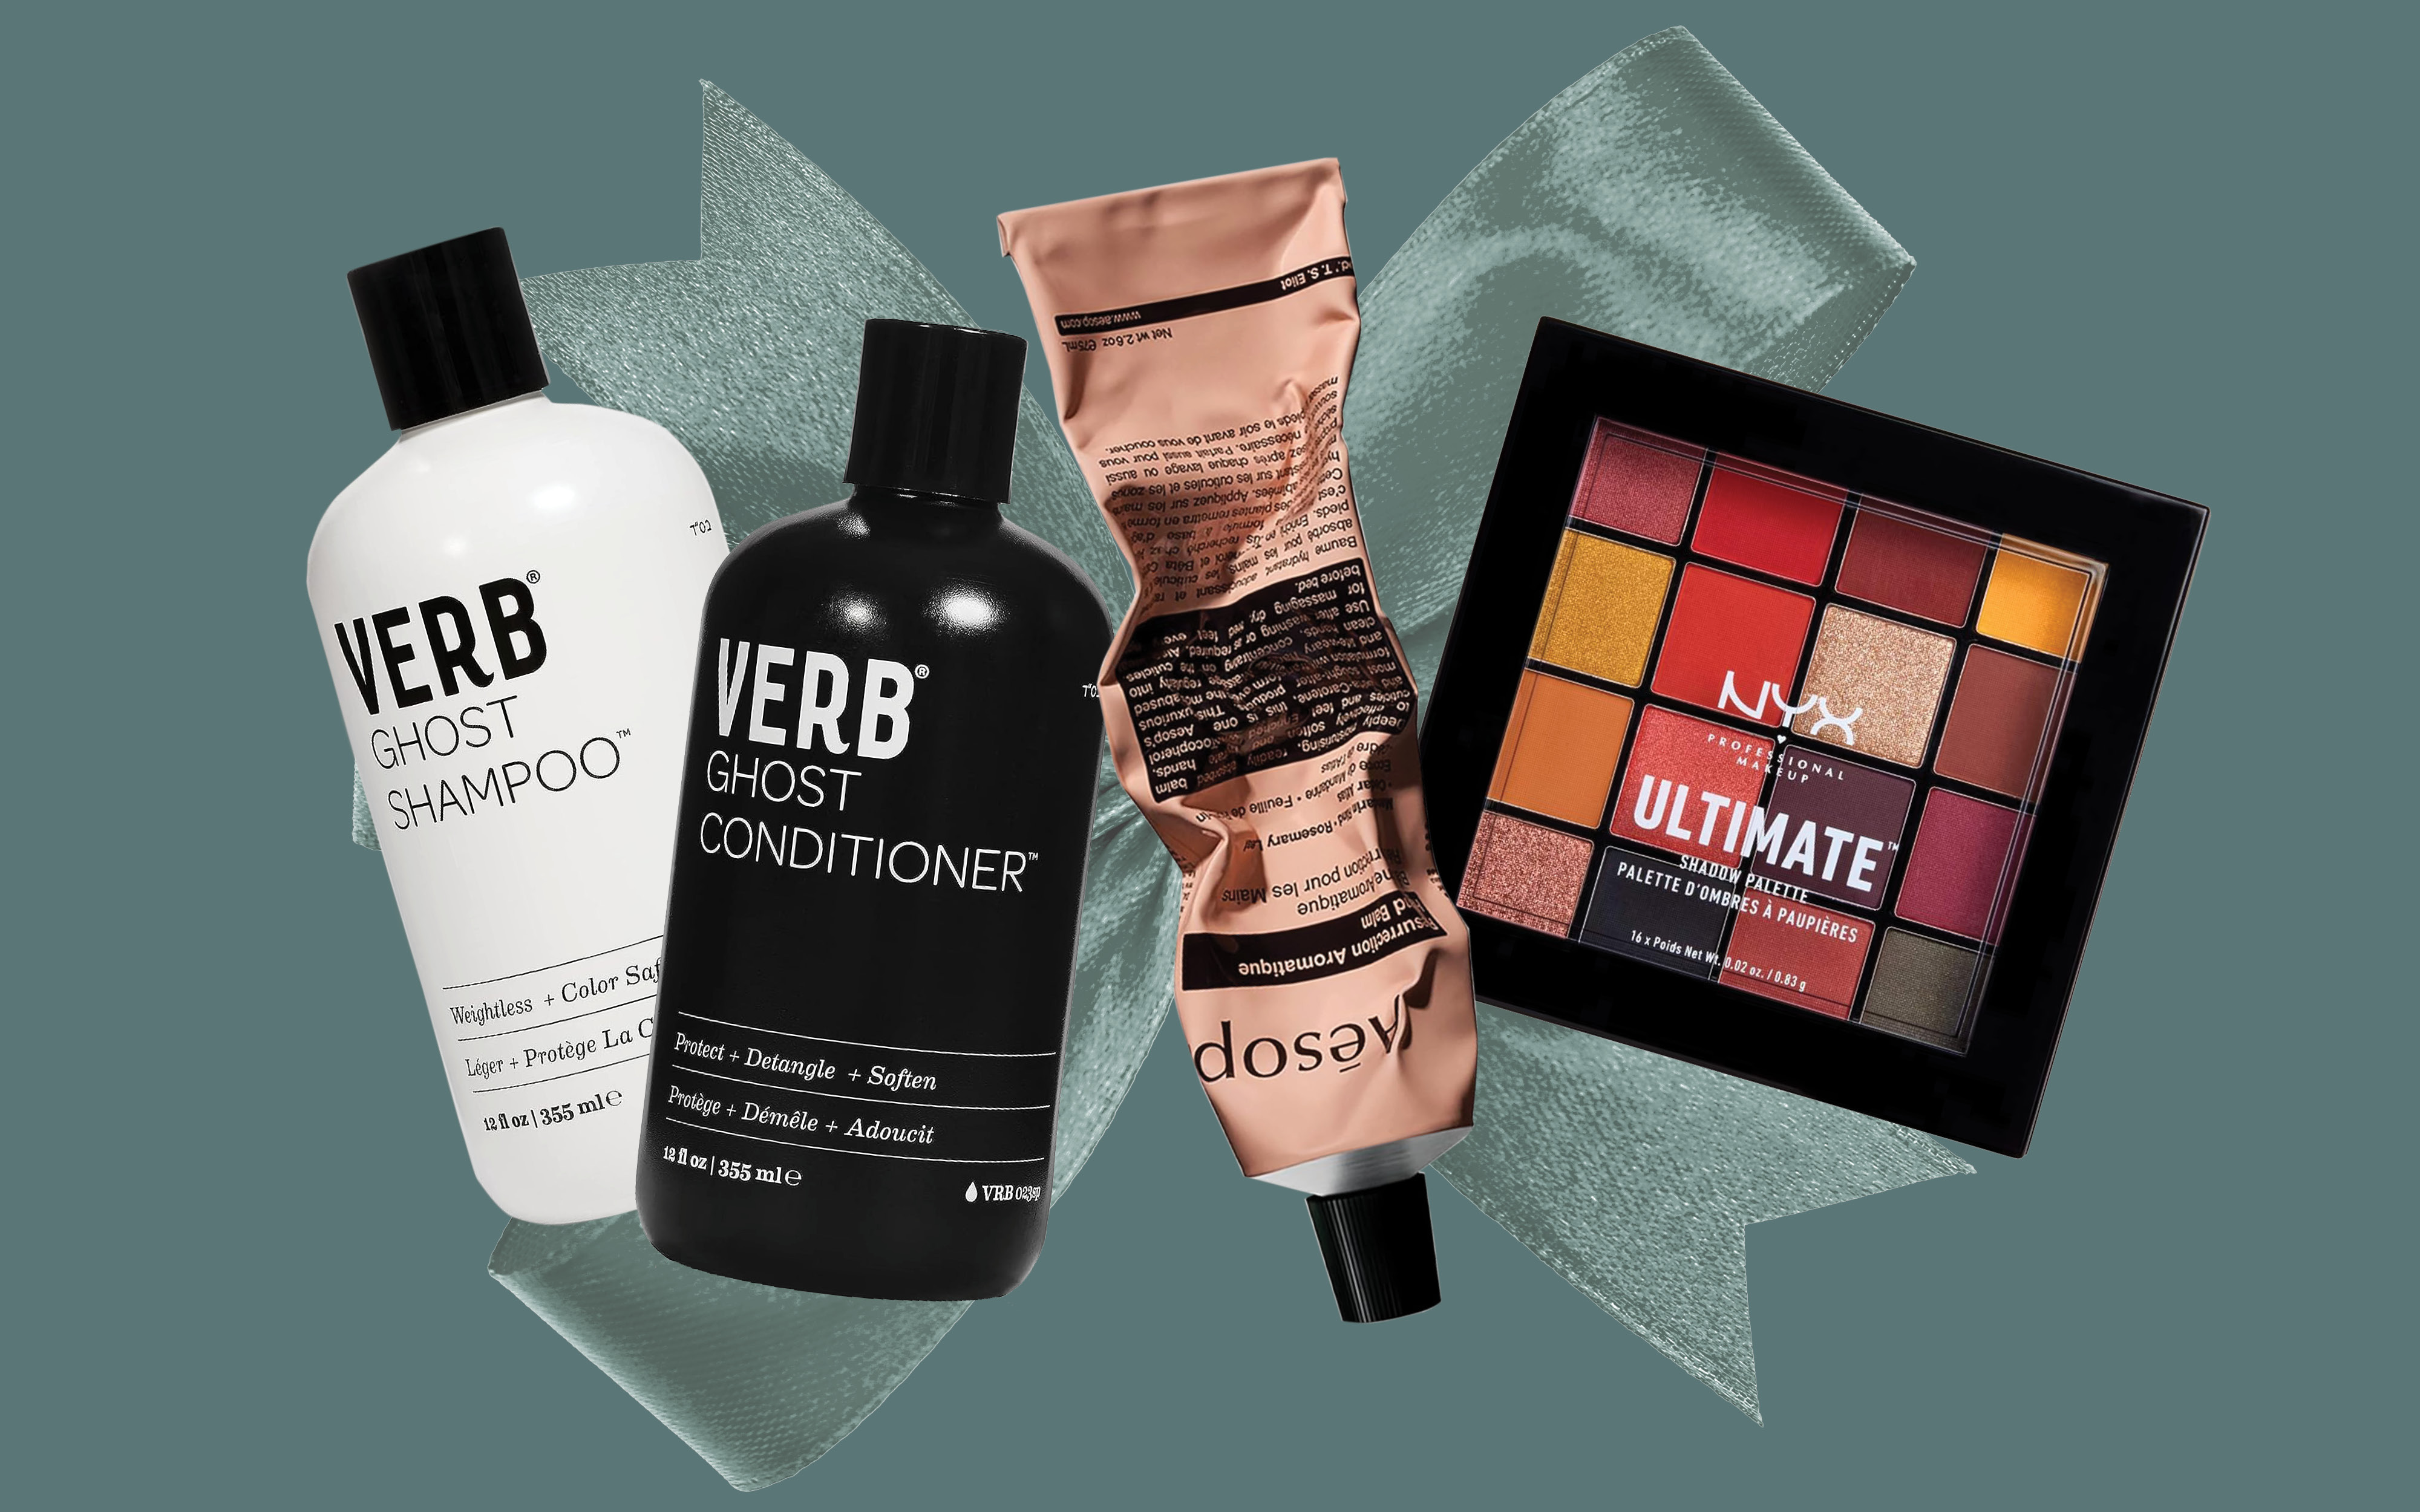 Best Beauty Gifts Under $50 to Buy Now